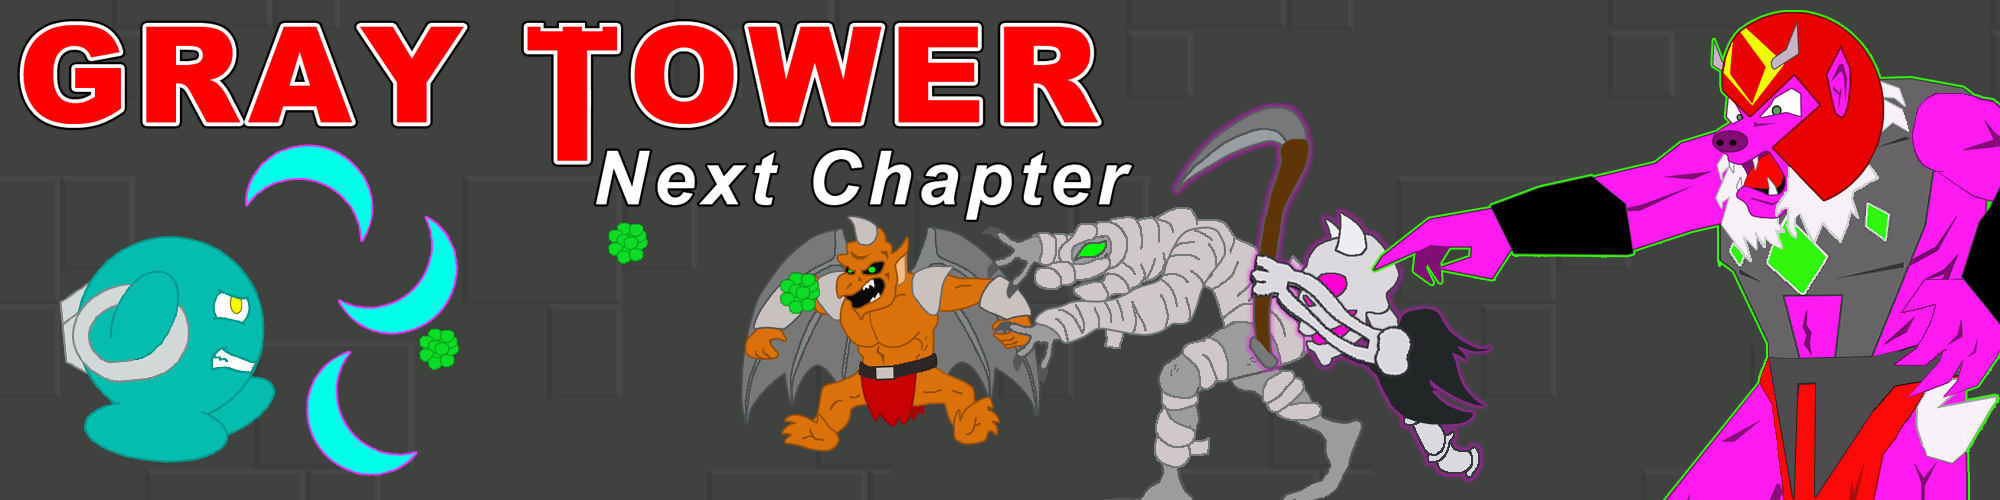 Gray Tower Next Chapter